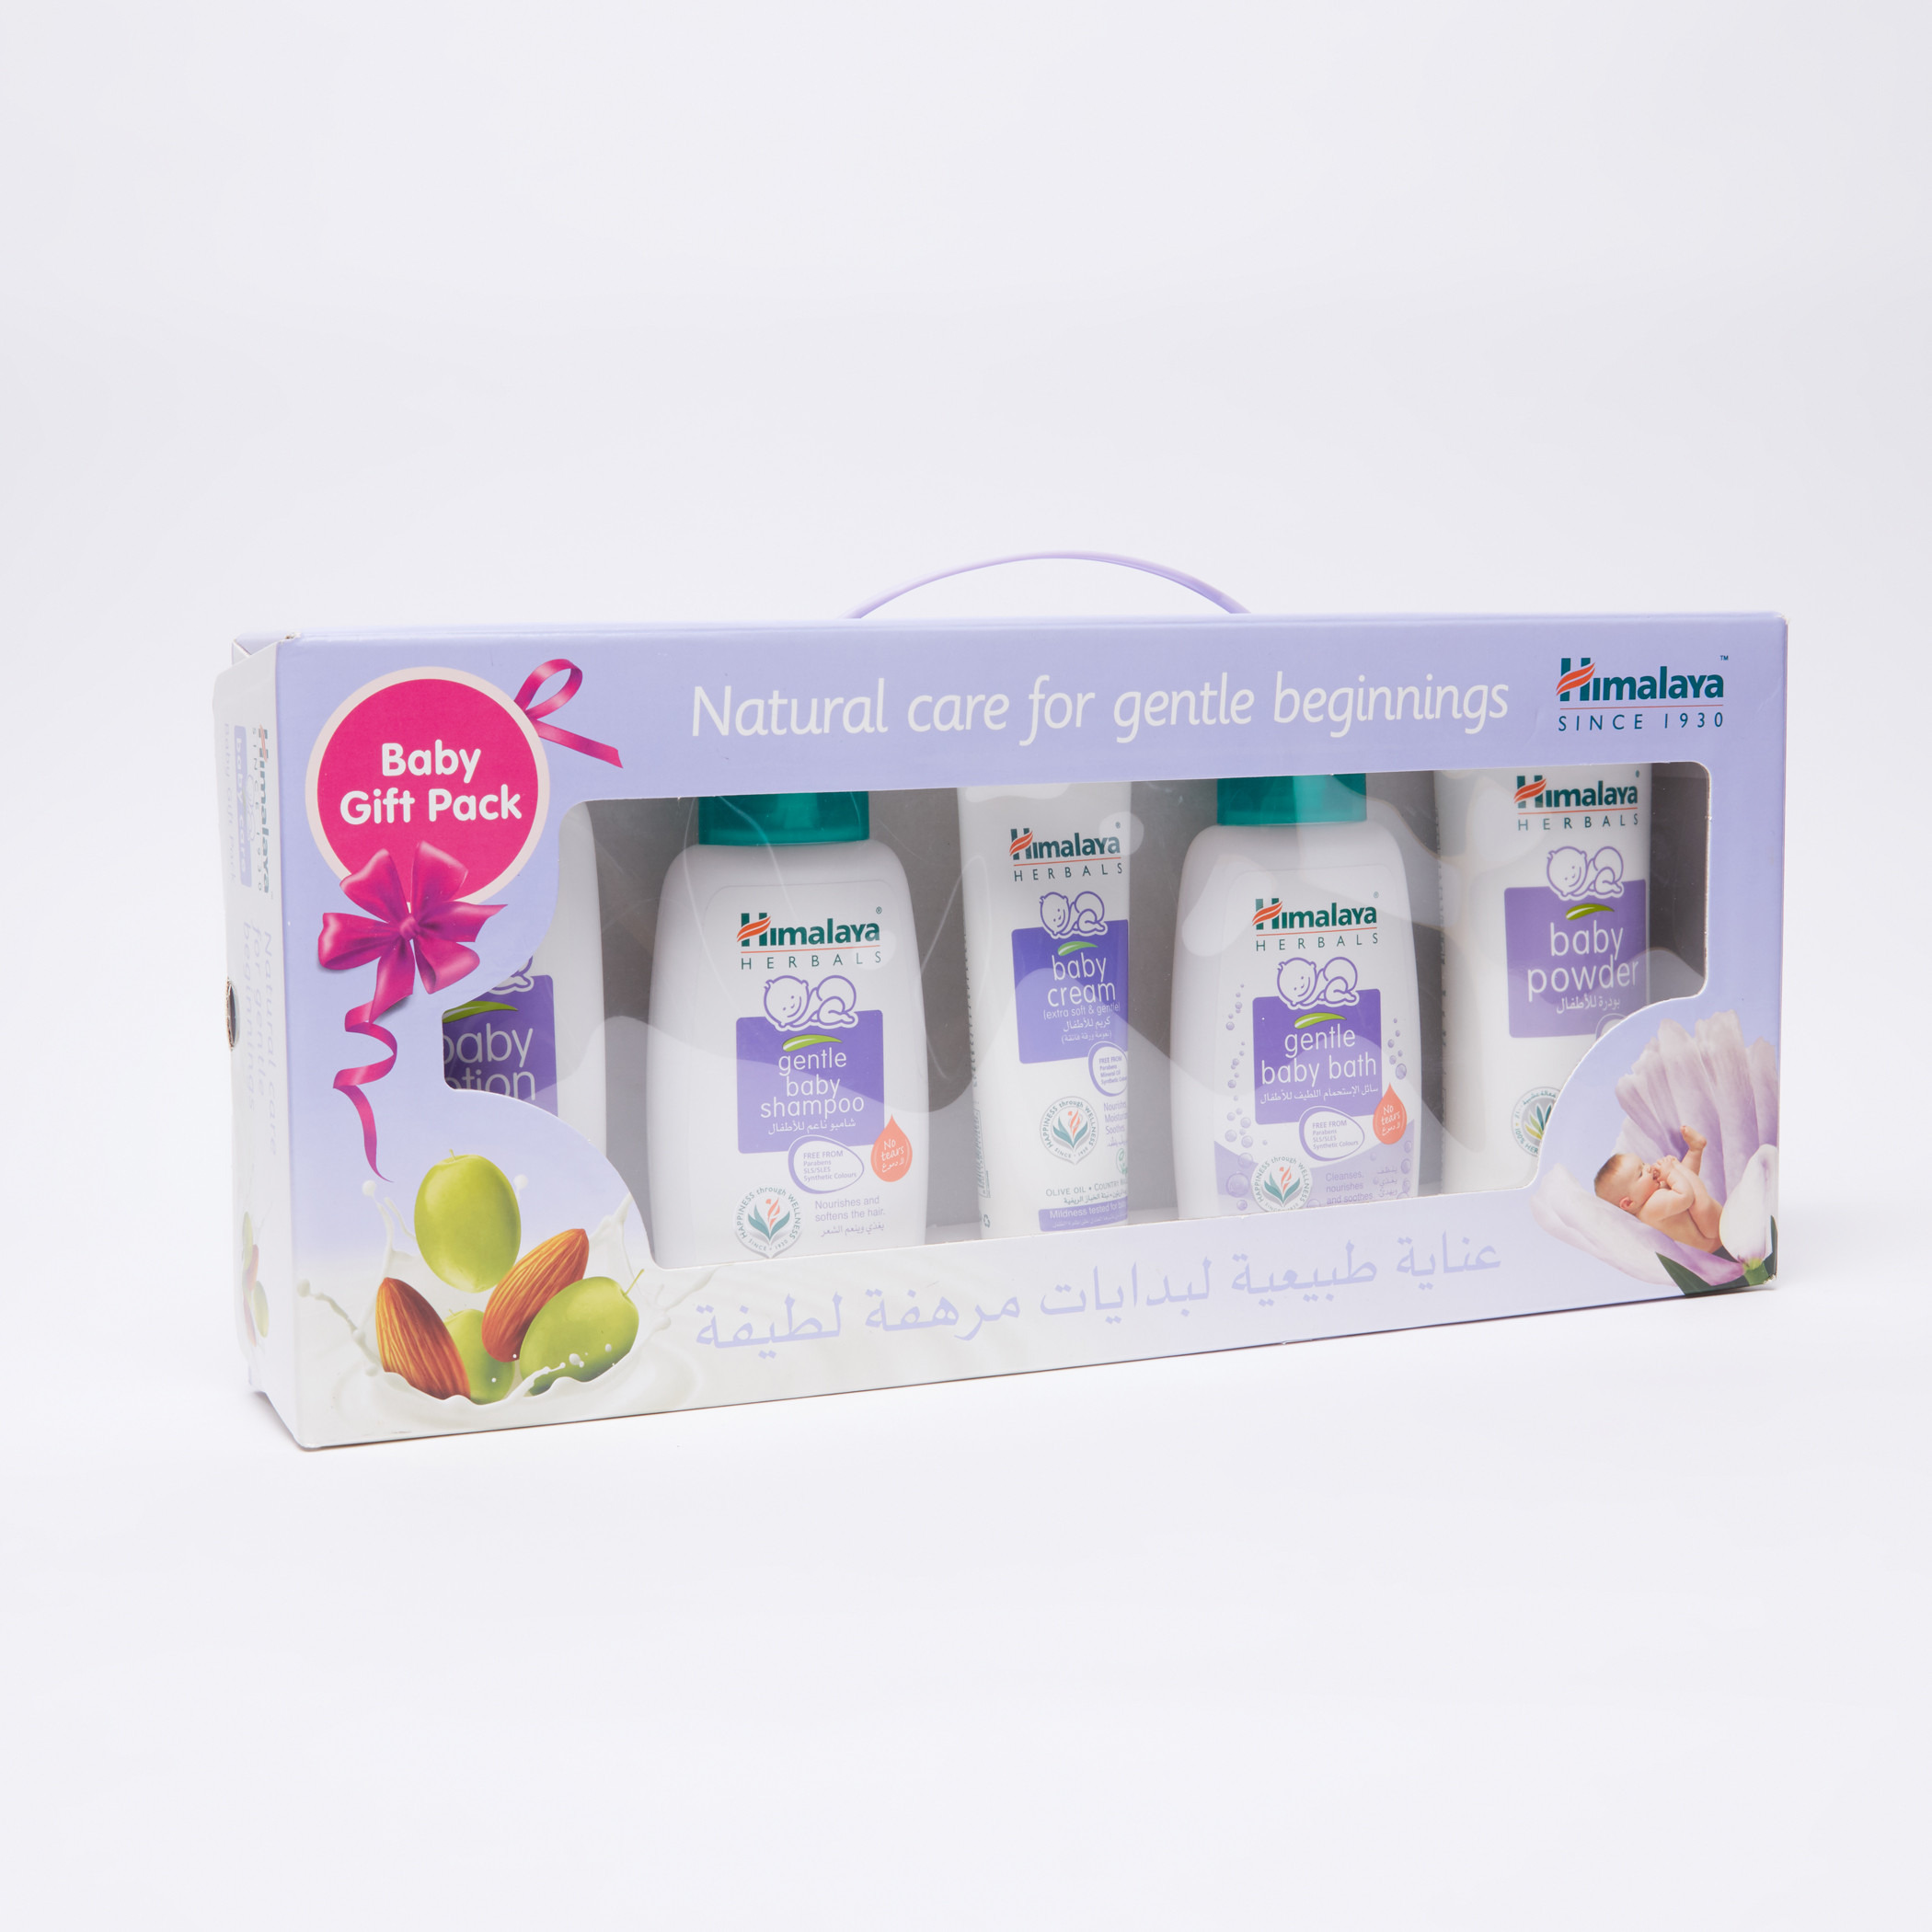 Happy Baby Gift Pack – 9 in 1 - RichesM Healthcare